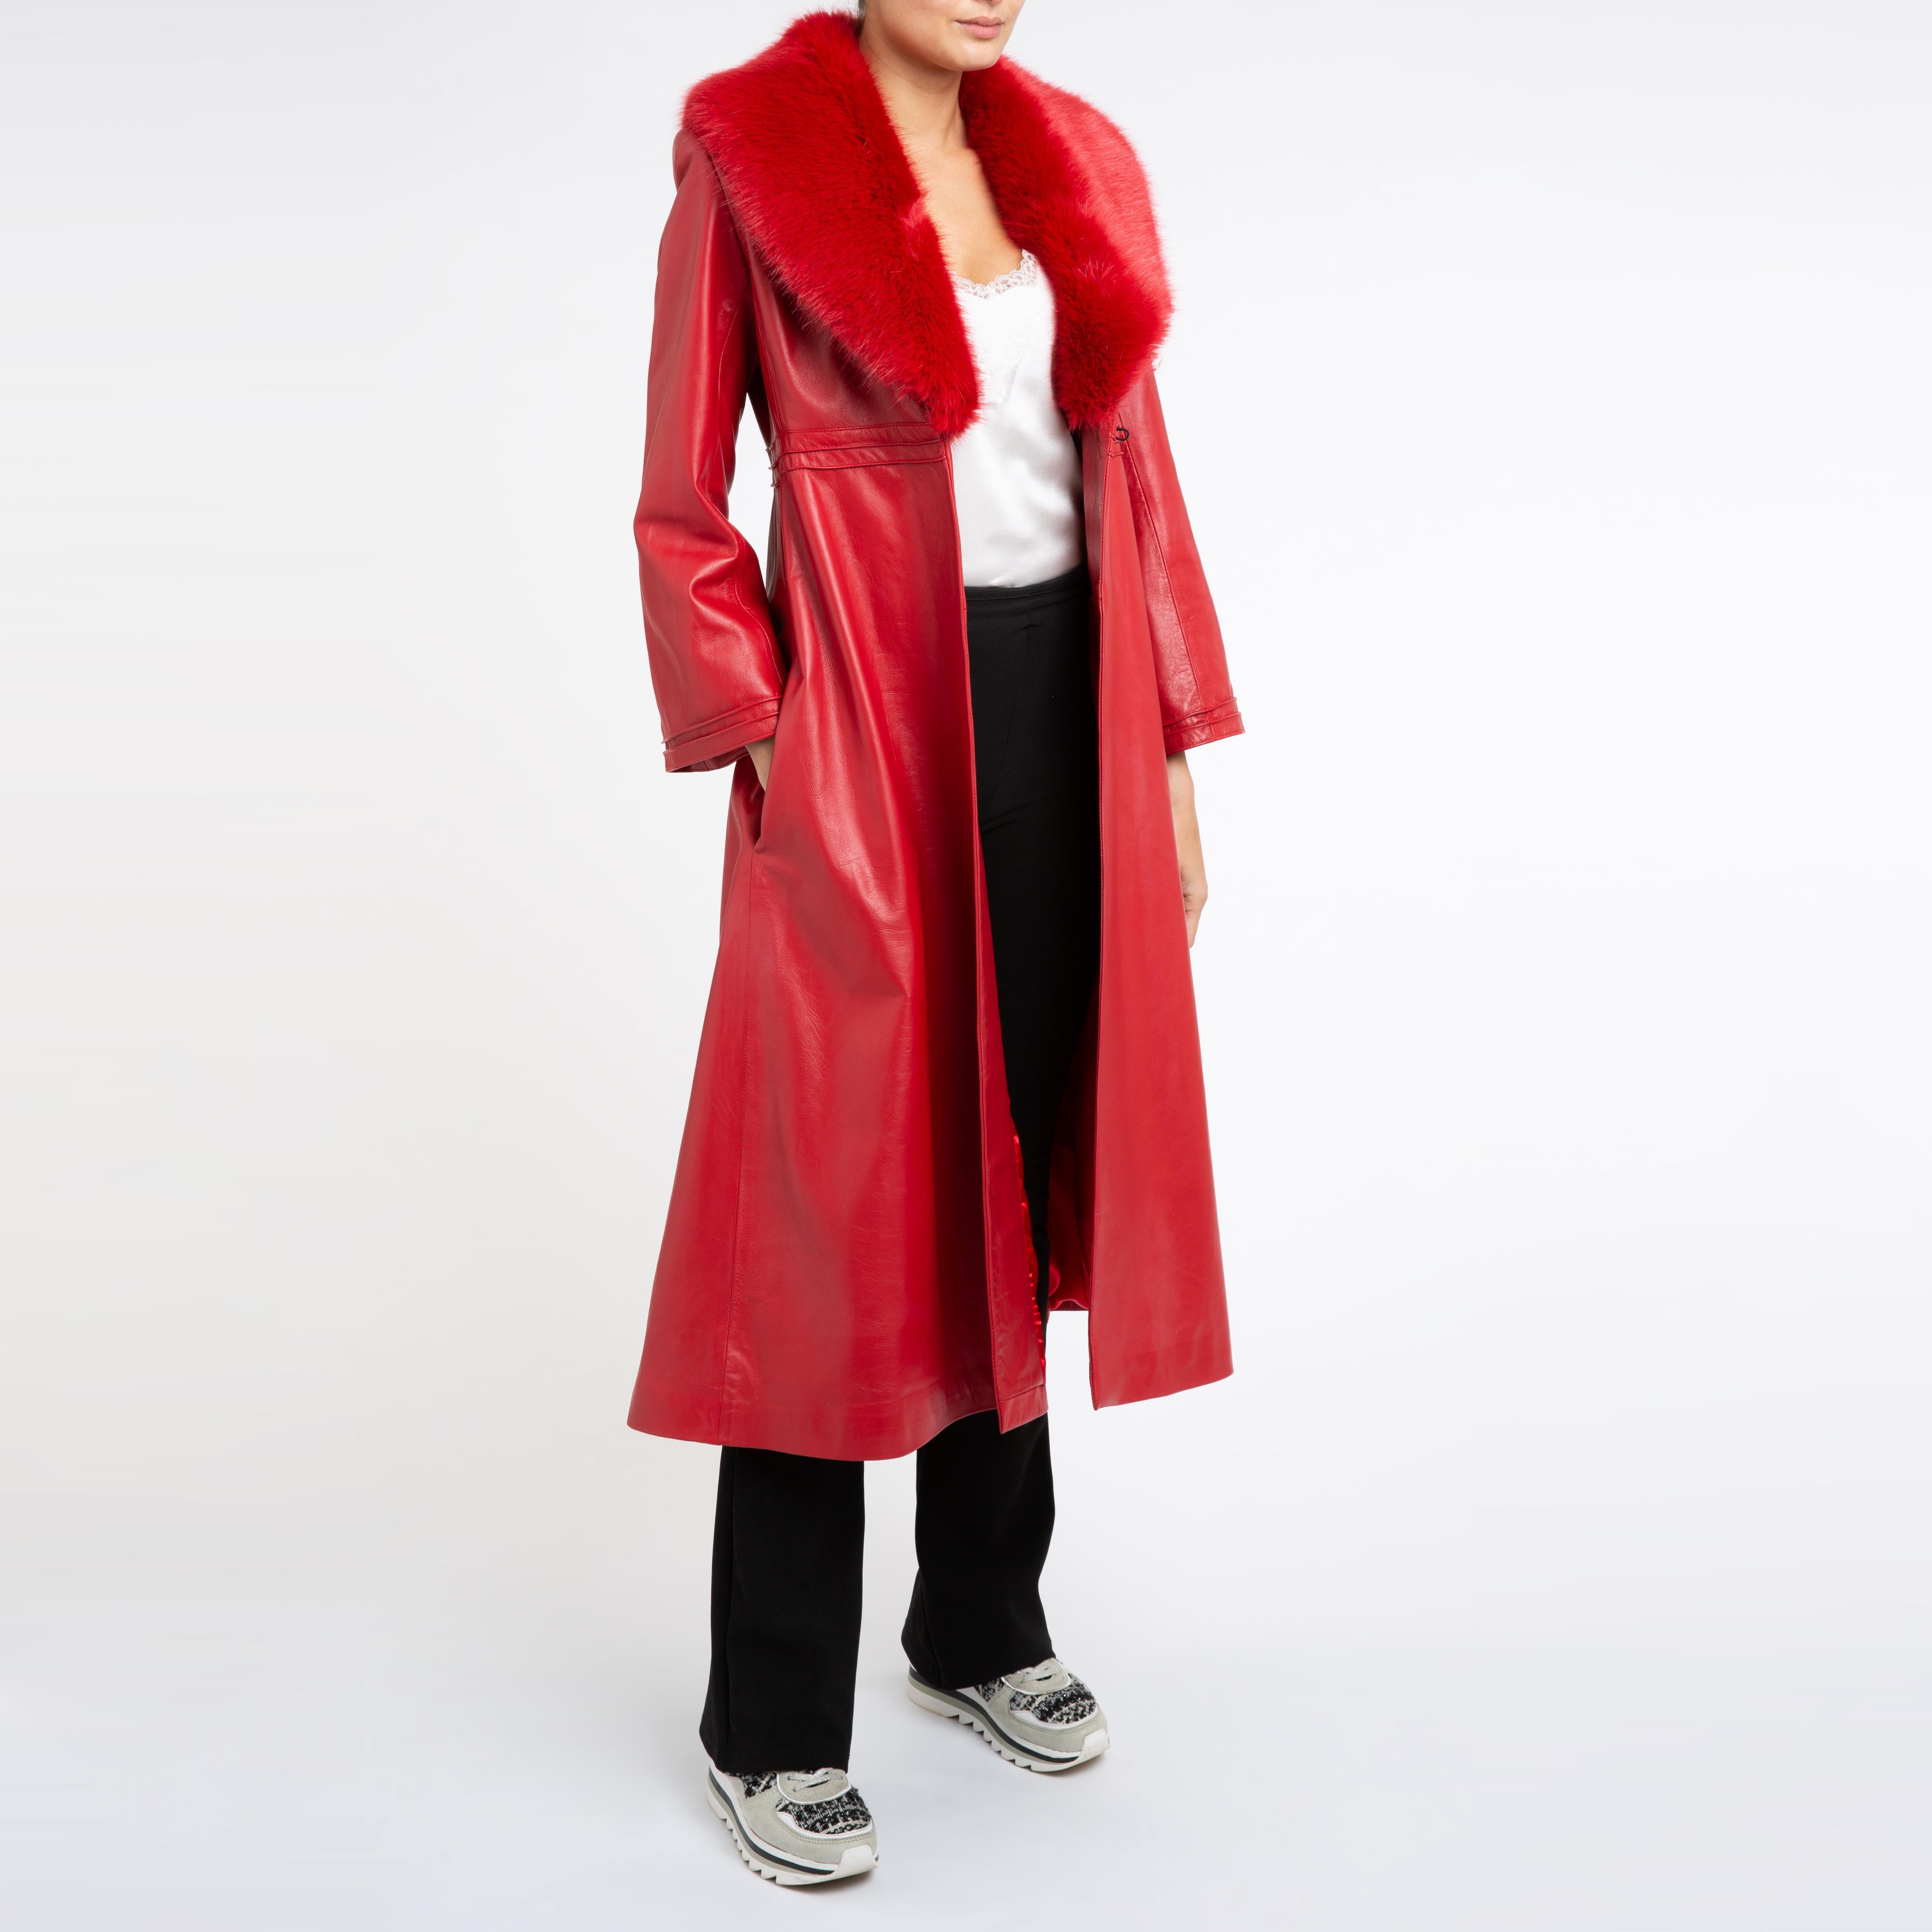 Verheyen London Edward Leather Coat with Faux Fur Collar in Red - Size uk 12 For Sale 4